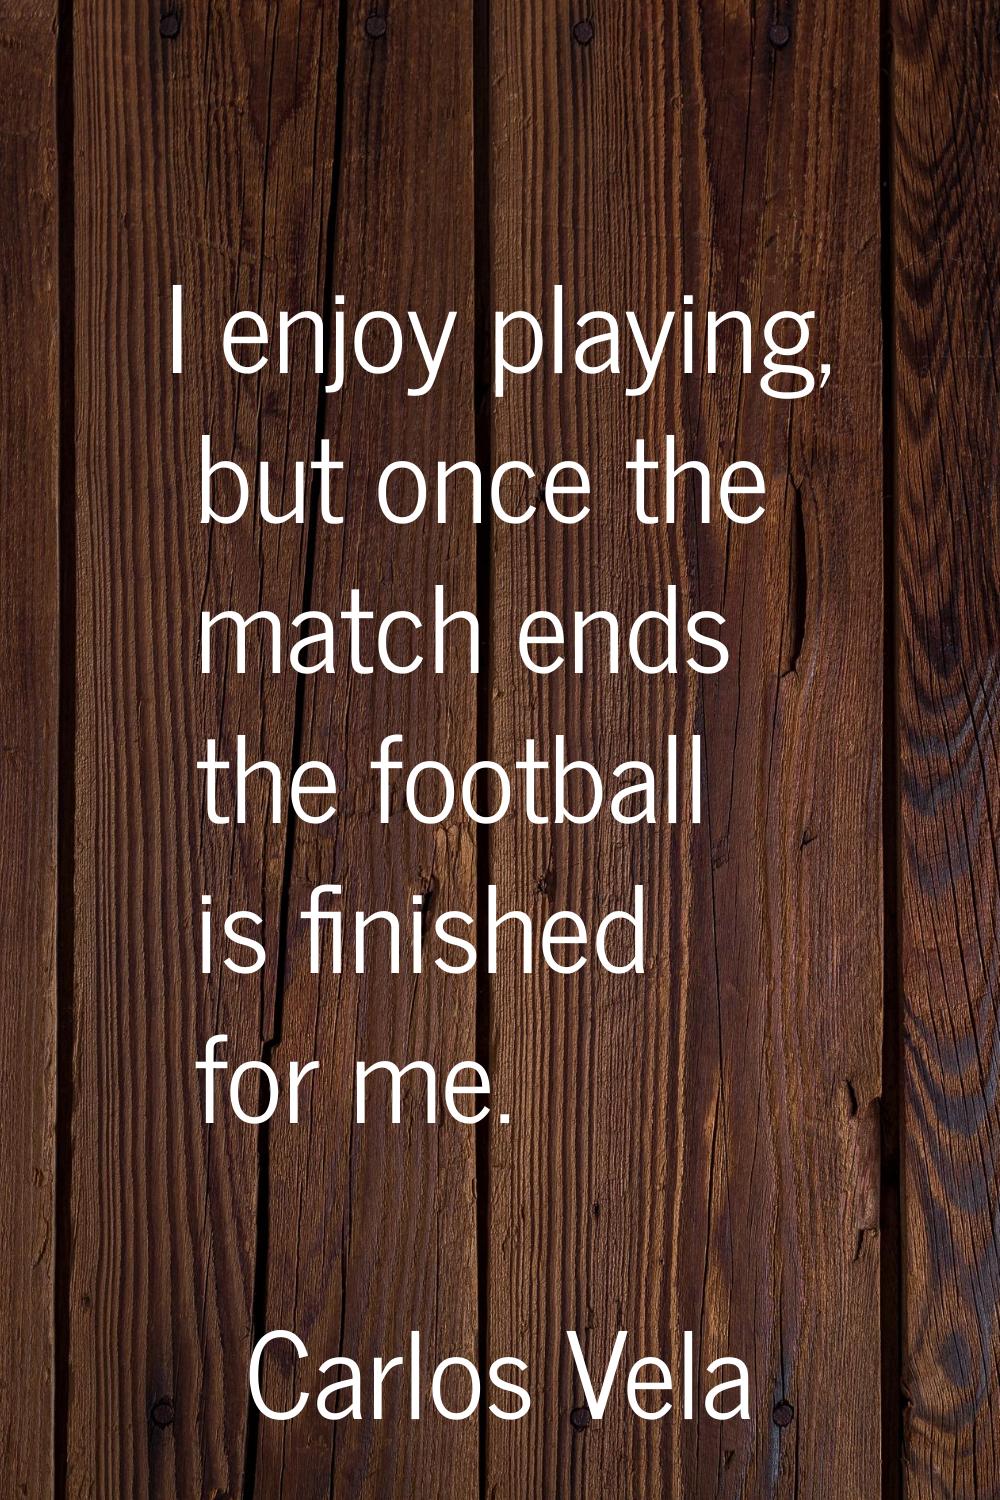 I enjoy playing, but once the match ends the football is finished for me.